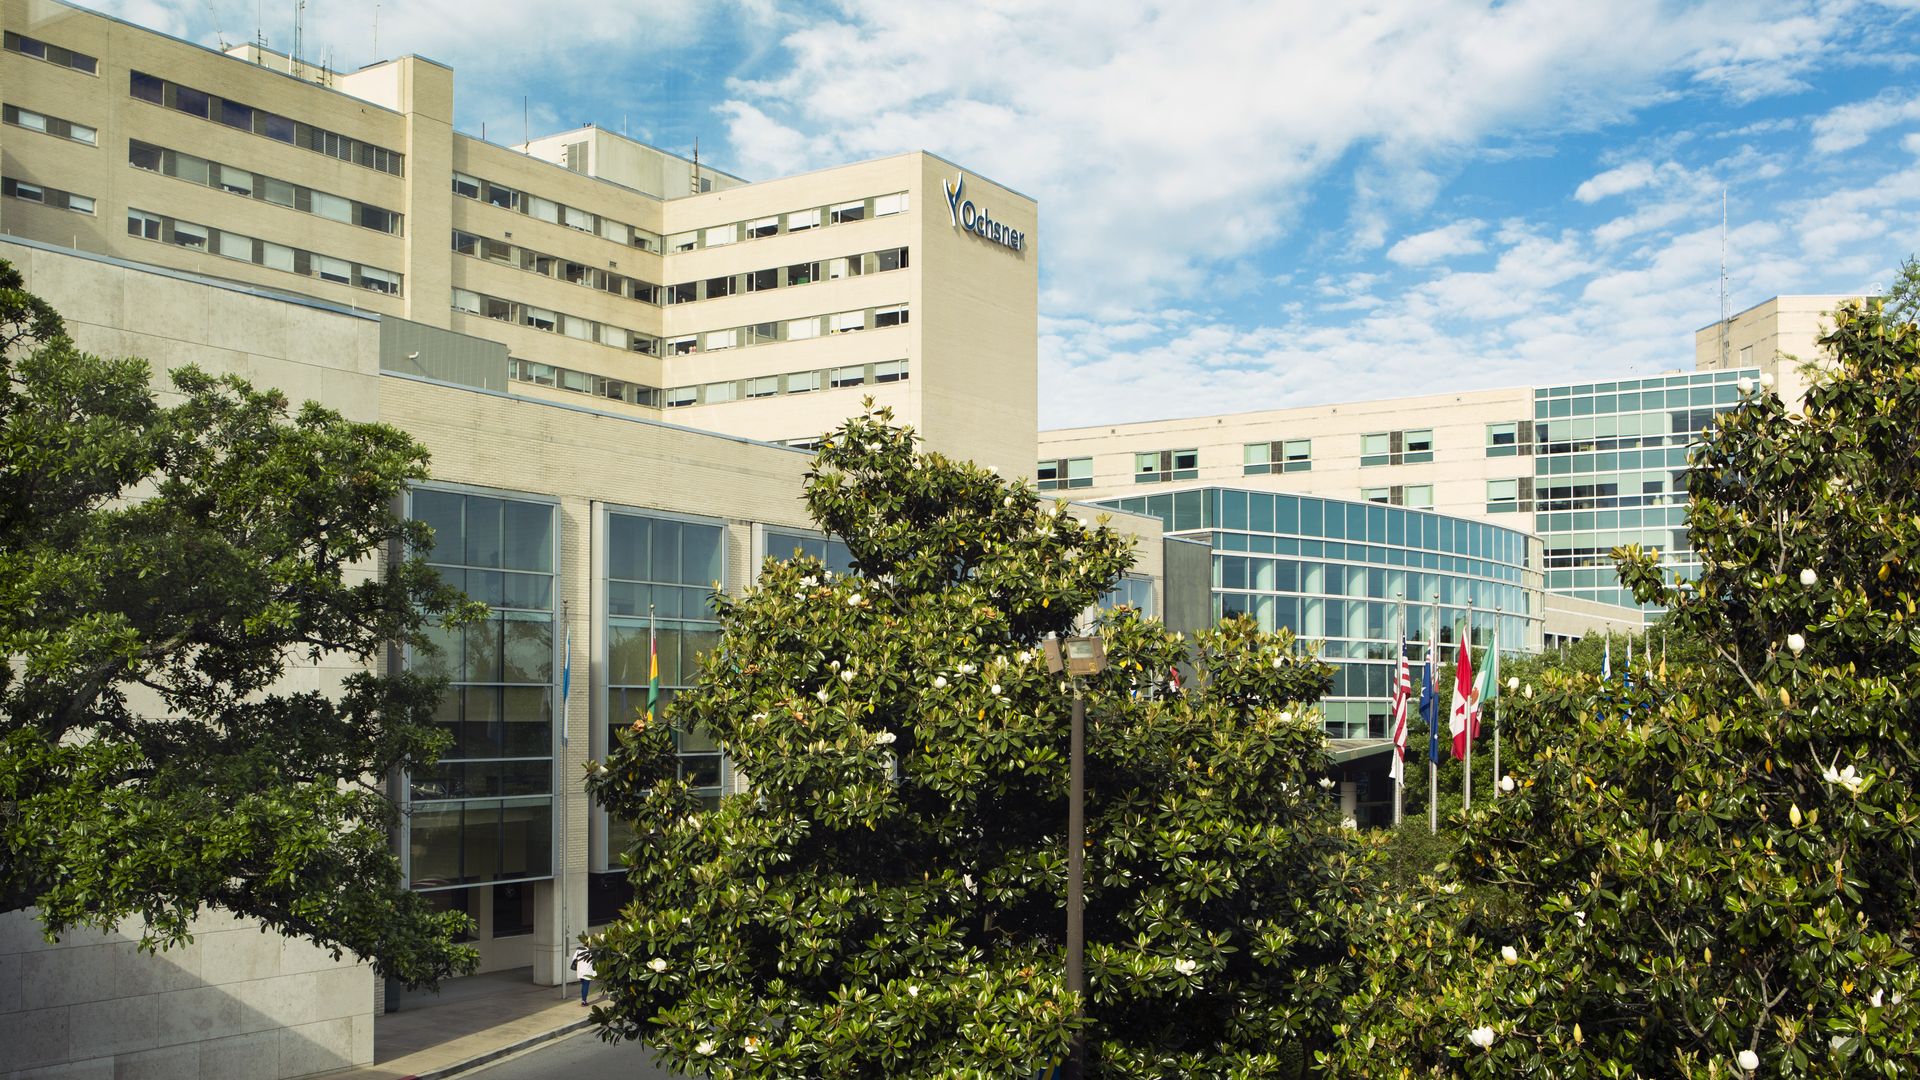 Photo shows an exterior view of Ochsner Medical Center in Jefferson Parish. Blooming magnolia trees are in the foreground.